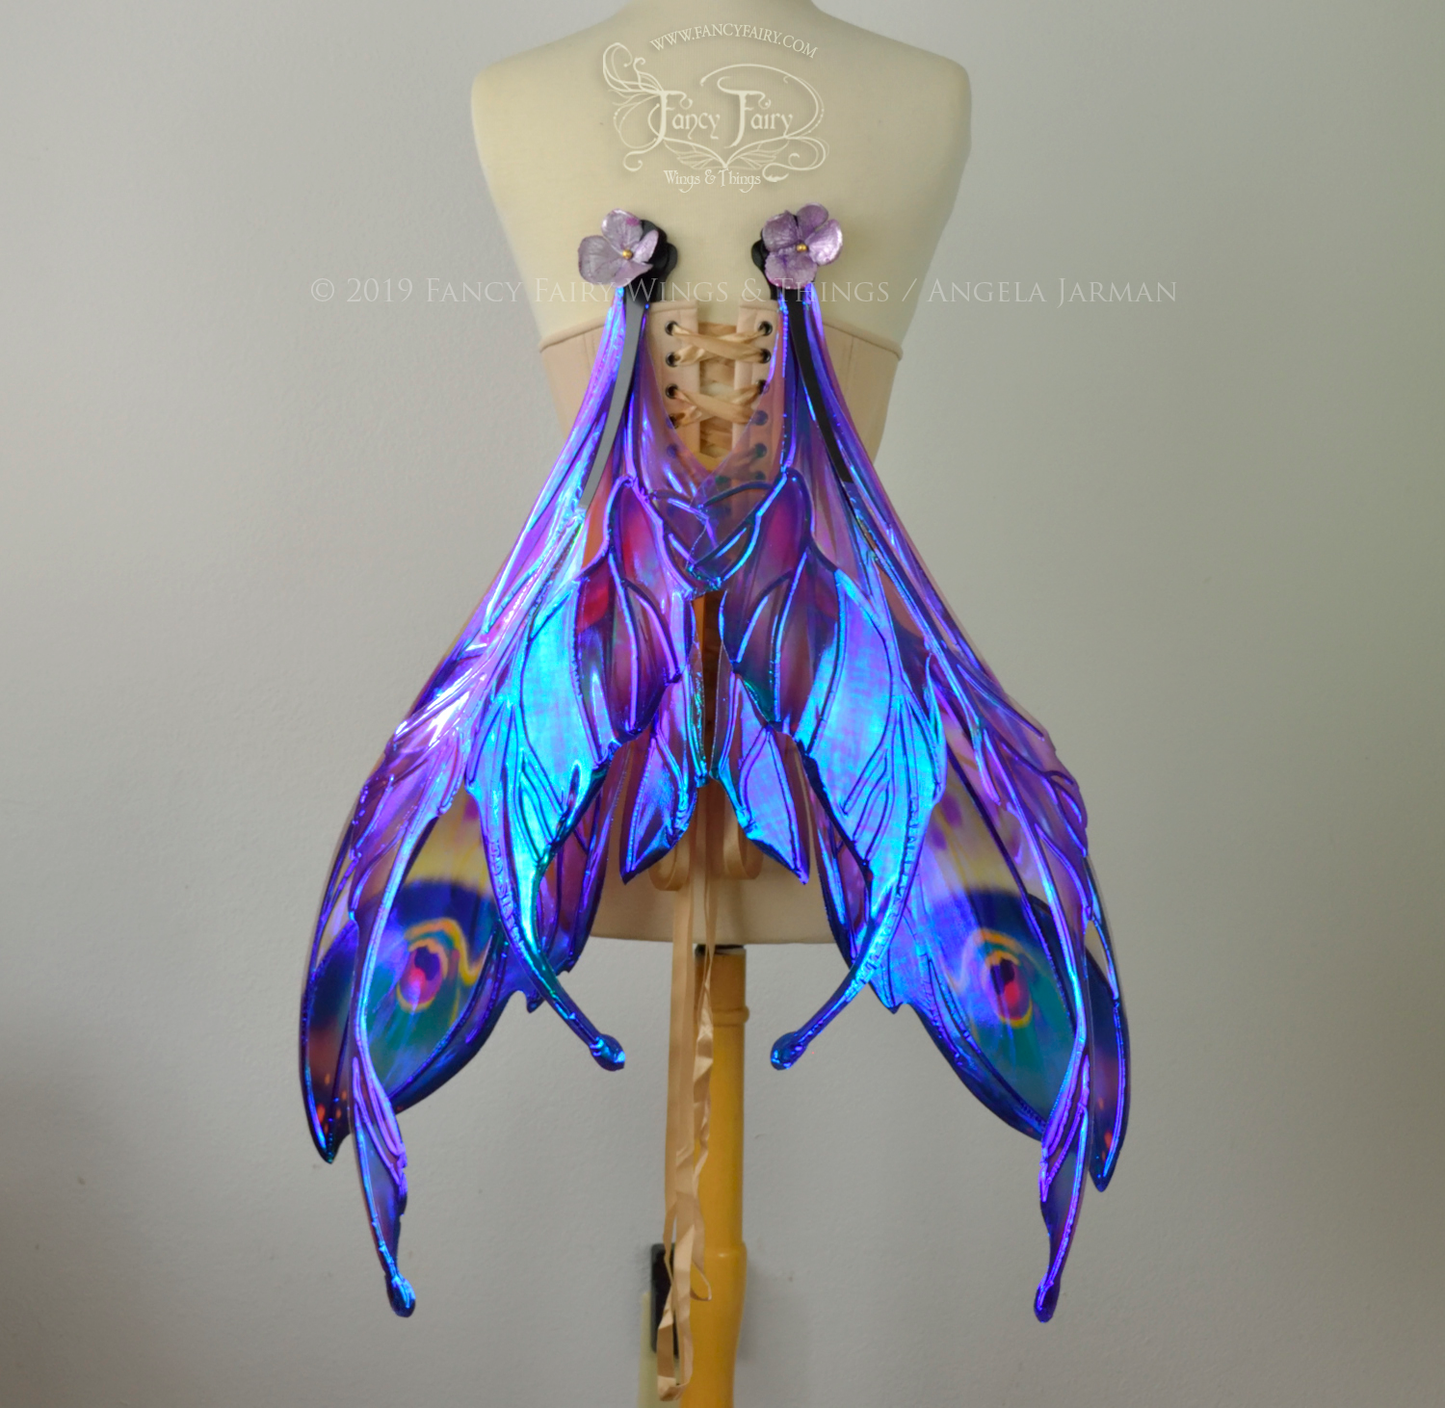 Back view of a dress form wearing an underbust corset & extra large iridescent fairy wings with mauve purple & blue color pattern , in resting position